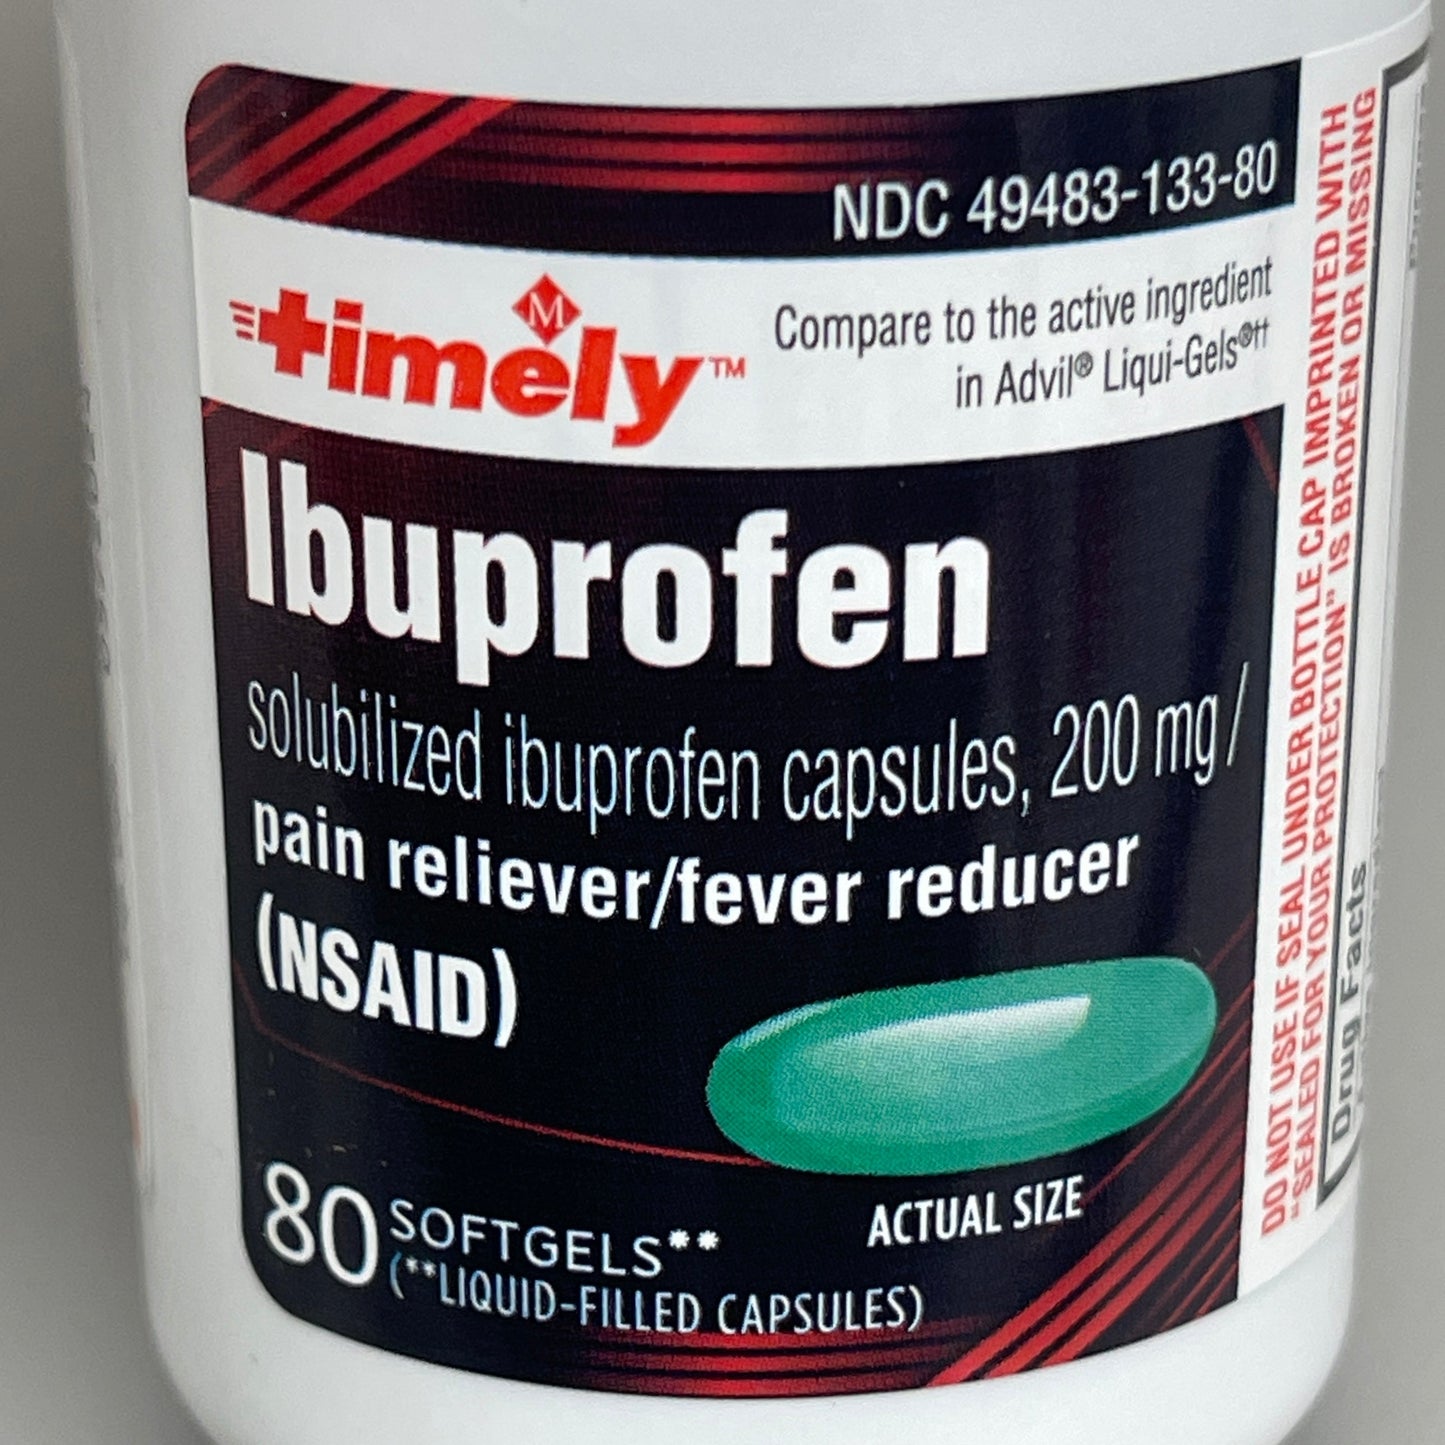 Z@ TIMELY Ibuprofen 80 Softgels 200mg Pain Reliever/Fever Reducer BB 05/24 (New) (Copy)